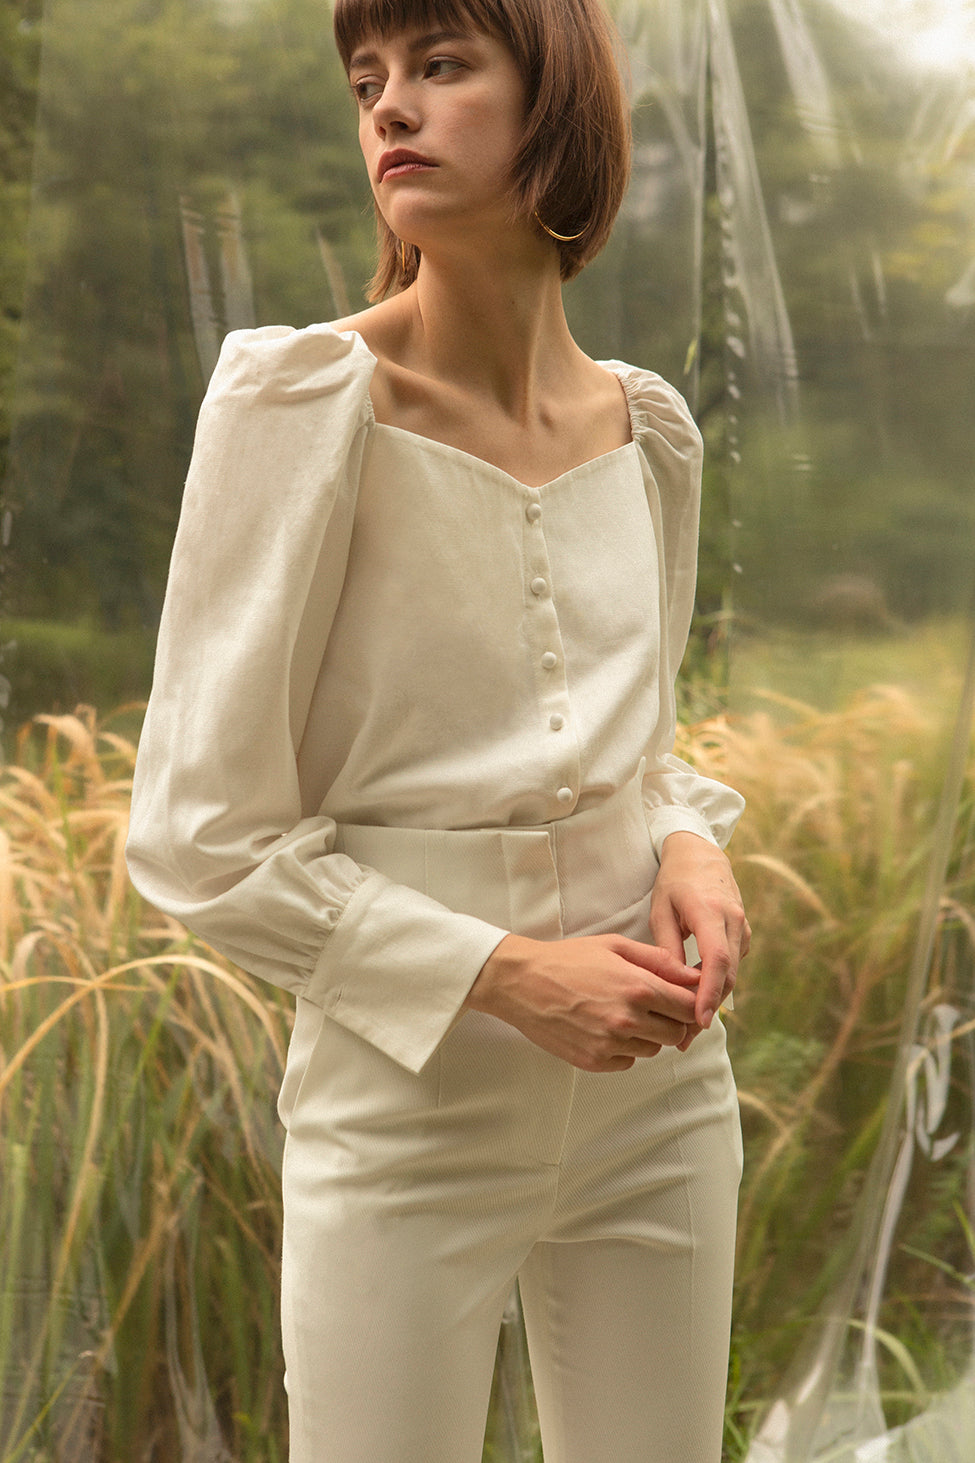 Sculptural blouse in bateau neckline. Ruched details at shoulders. Voluminous sleeves with flounce cuffs and single button closure. Button down closure. Can be styled in off-the-shoulder silhouette.